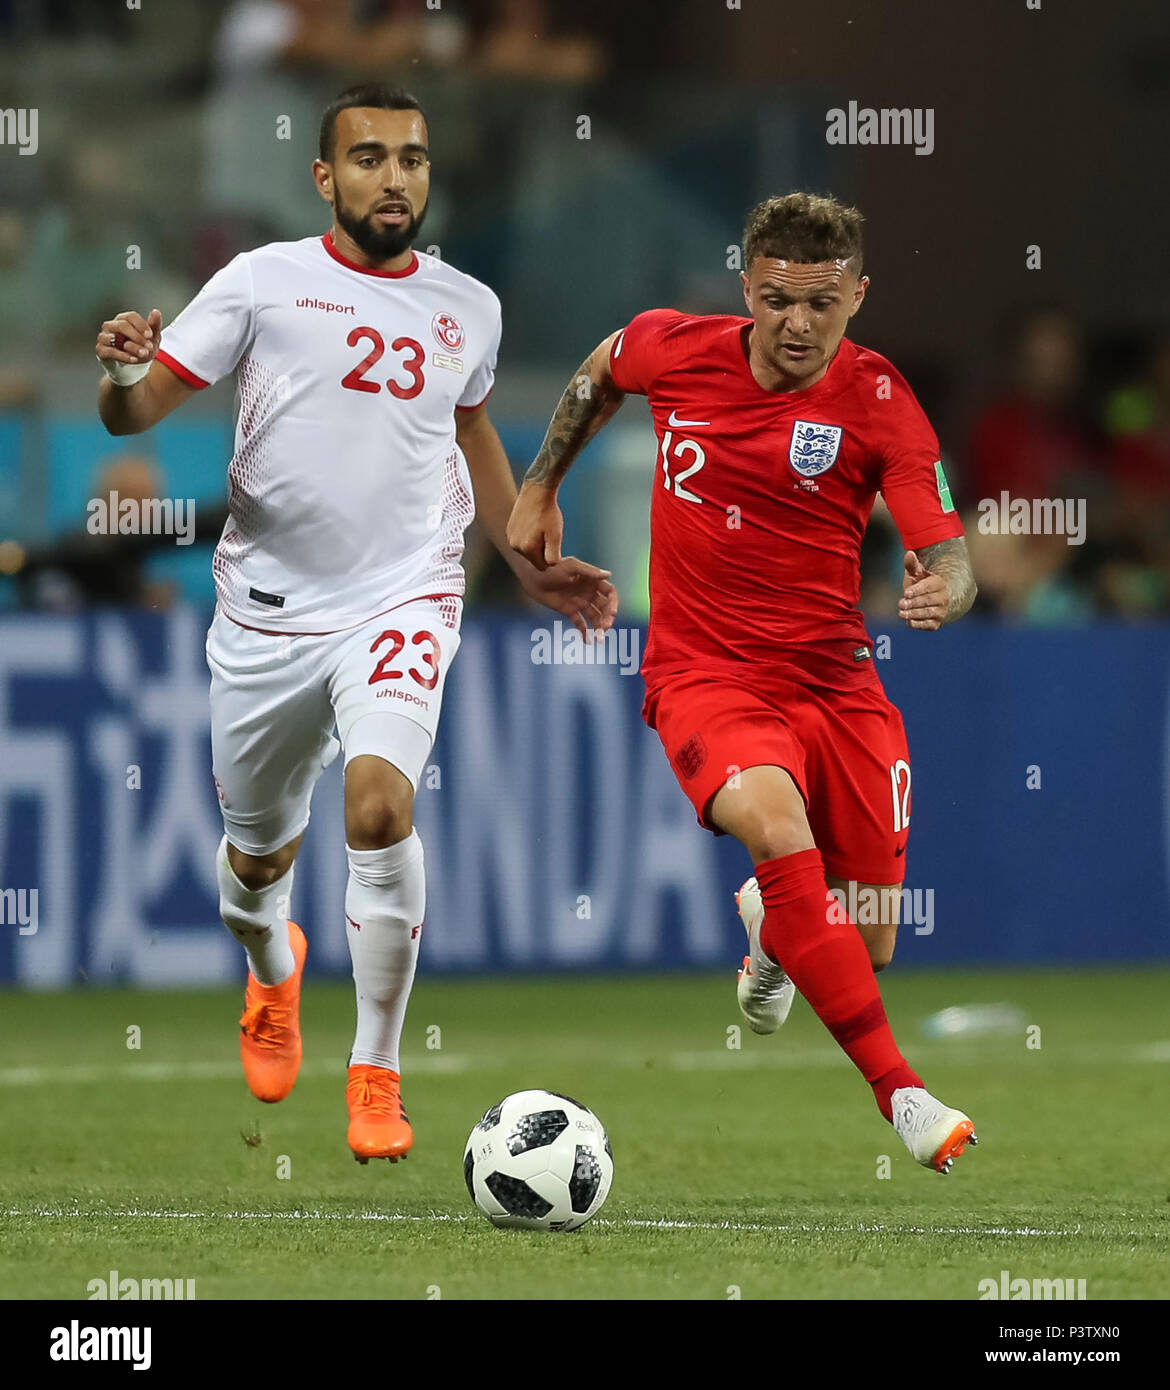 Volgograd, Russia. 18th Jun, 2018. Kieran Trippier of England and Naim Sliti of Tunisia during the 2018 FIFA World Cup Group G match between Tunisia and England at Volgograd Arena on June 18th 2018 in Volgograd, Russia. (Photo by Daniel Chesterton/phcimages.com) Credit: PHC Images/Alamy Live News Stock Photo